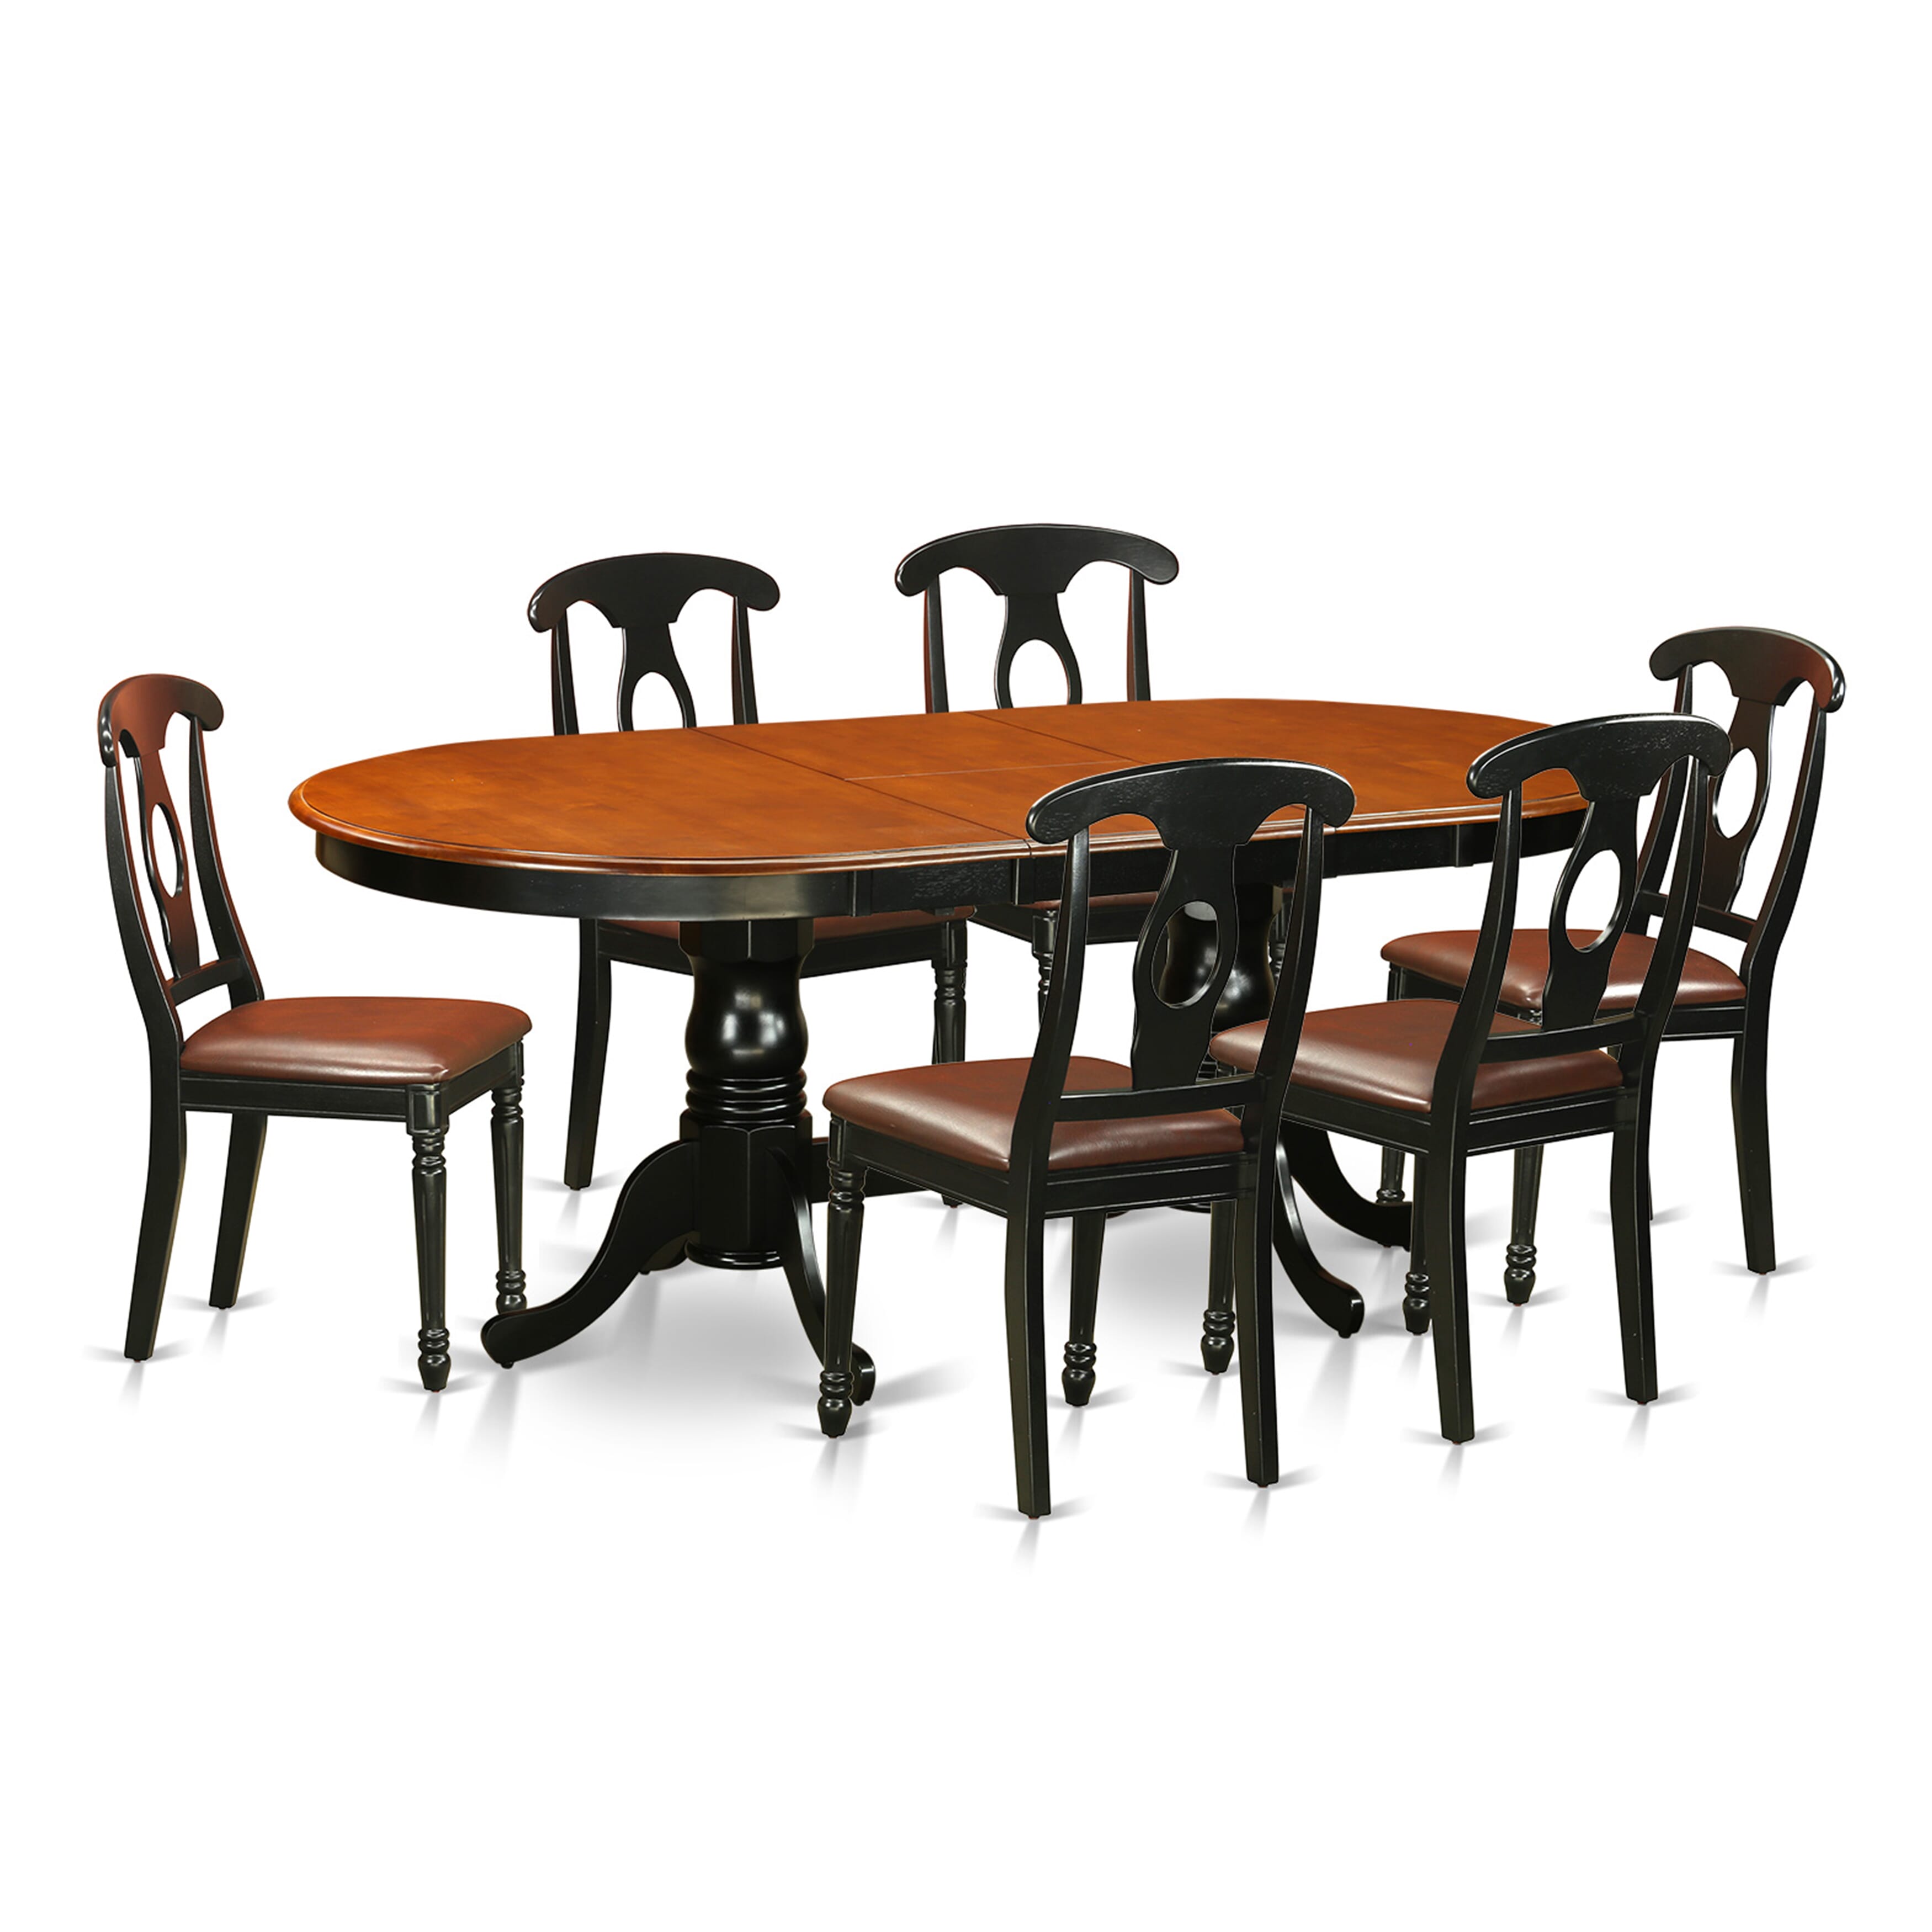 7 Pc Oval Dining room Table with Leaf and Leatherette Seat Chairs in Black / Cherry